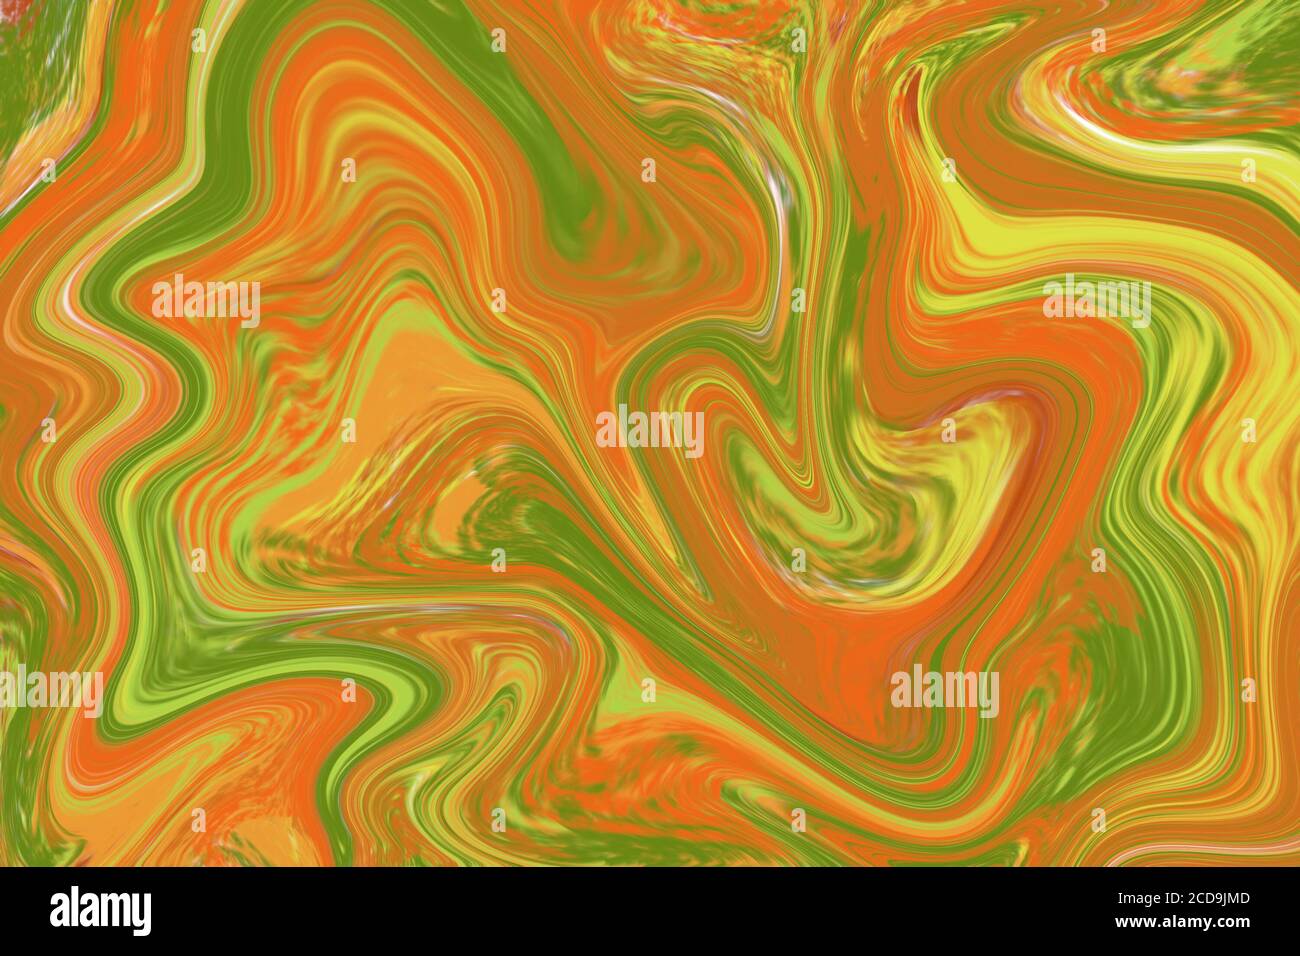 Orange green liquid paint abstraction. Marbled texture for autumn seasonal graphic design. Warm earth palette digital illustration. Abstract floating Stock Photo